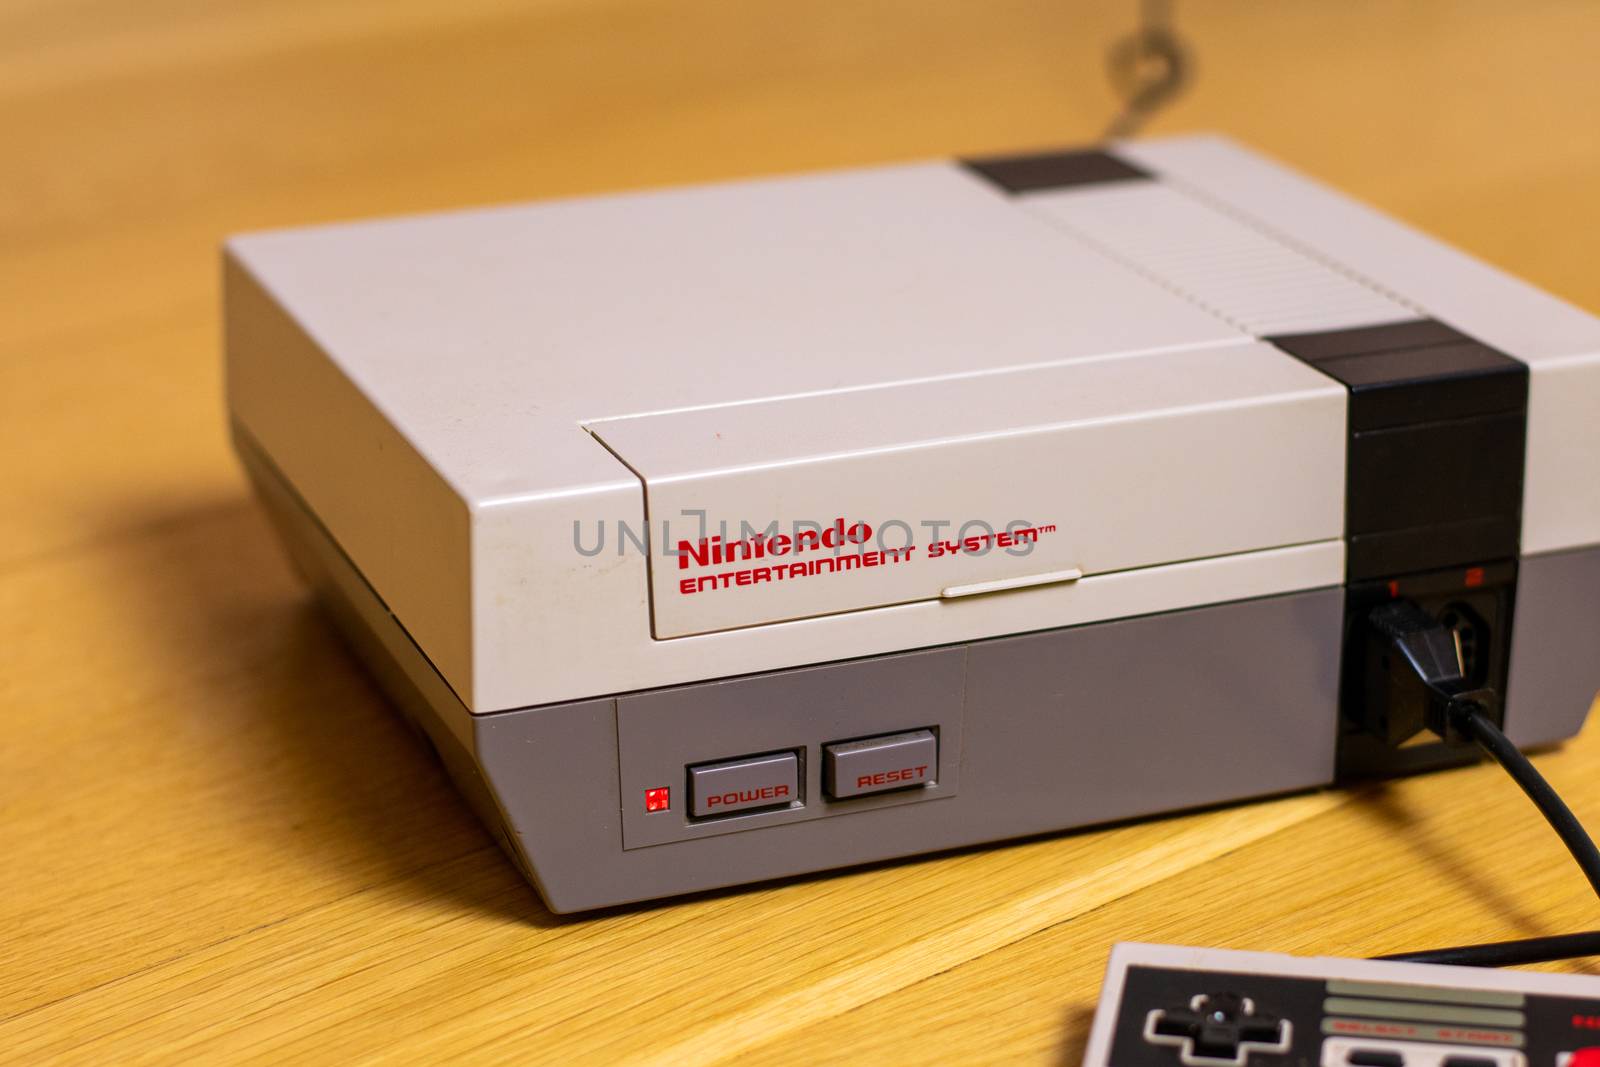 A Nintendo Entertainment System With a Controller Plugged In. The NES is a popular retro console.